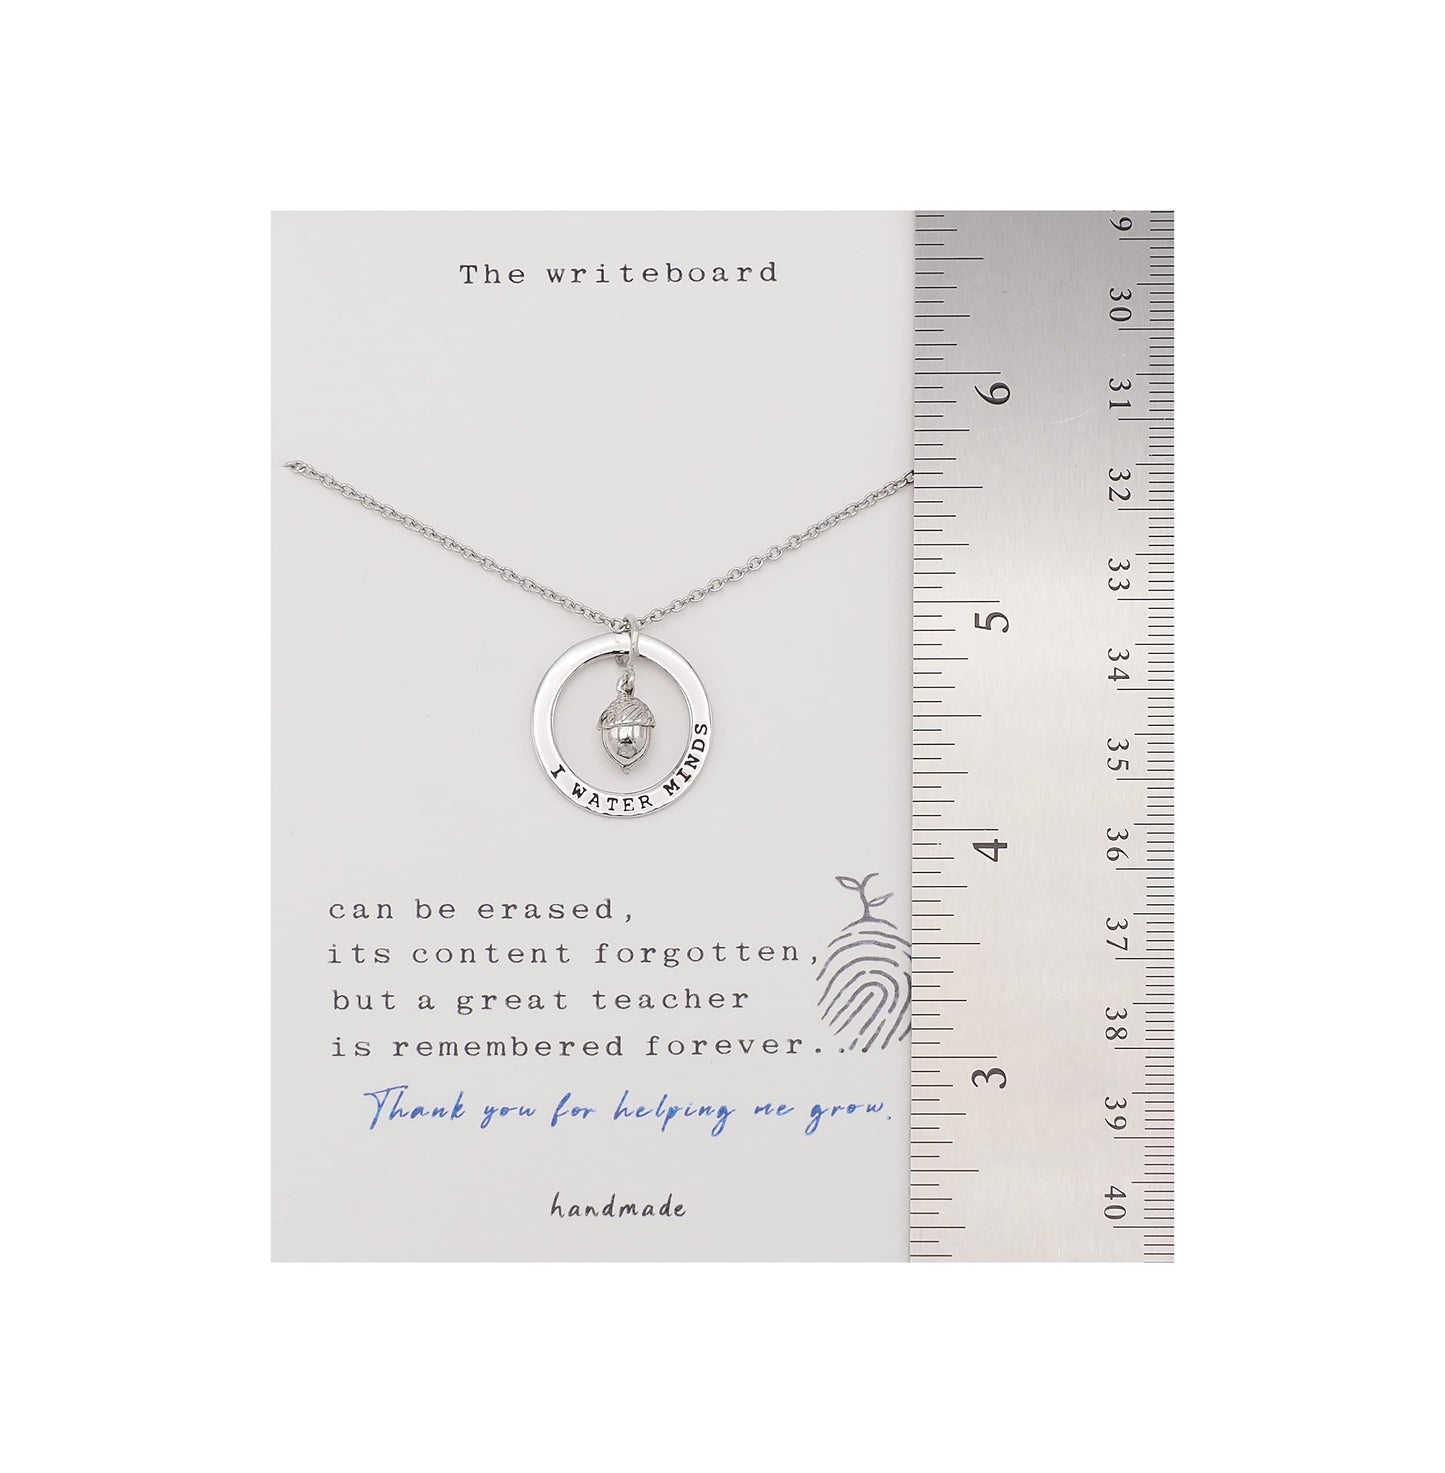 Quinnlyn & Co. Acorn in Circle Pendant Necklace, Handmade Gifts for Women with Inspirational Quote on Greeting Card